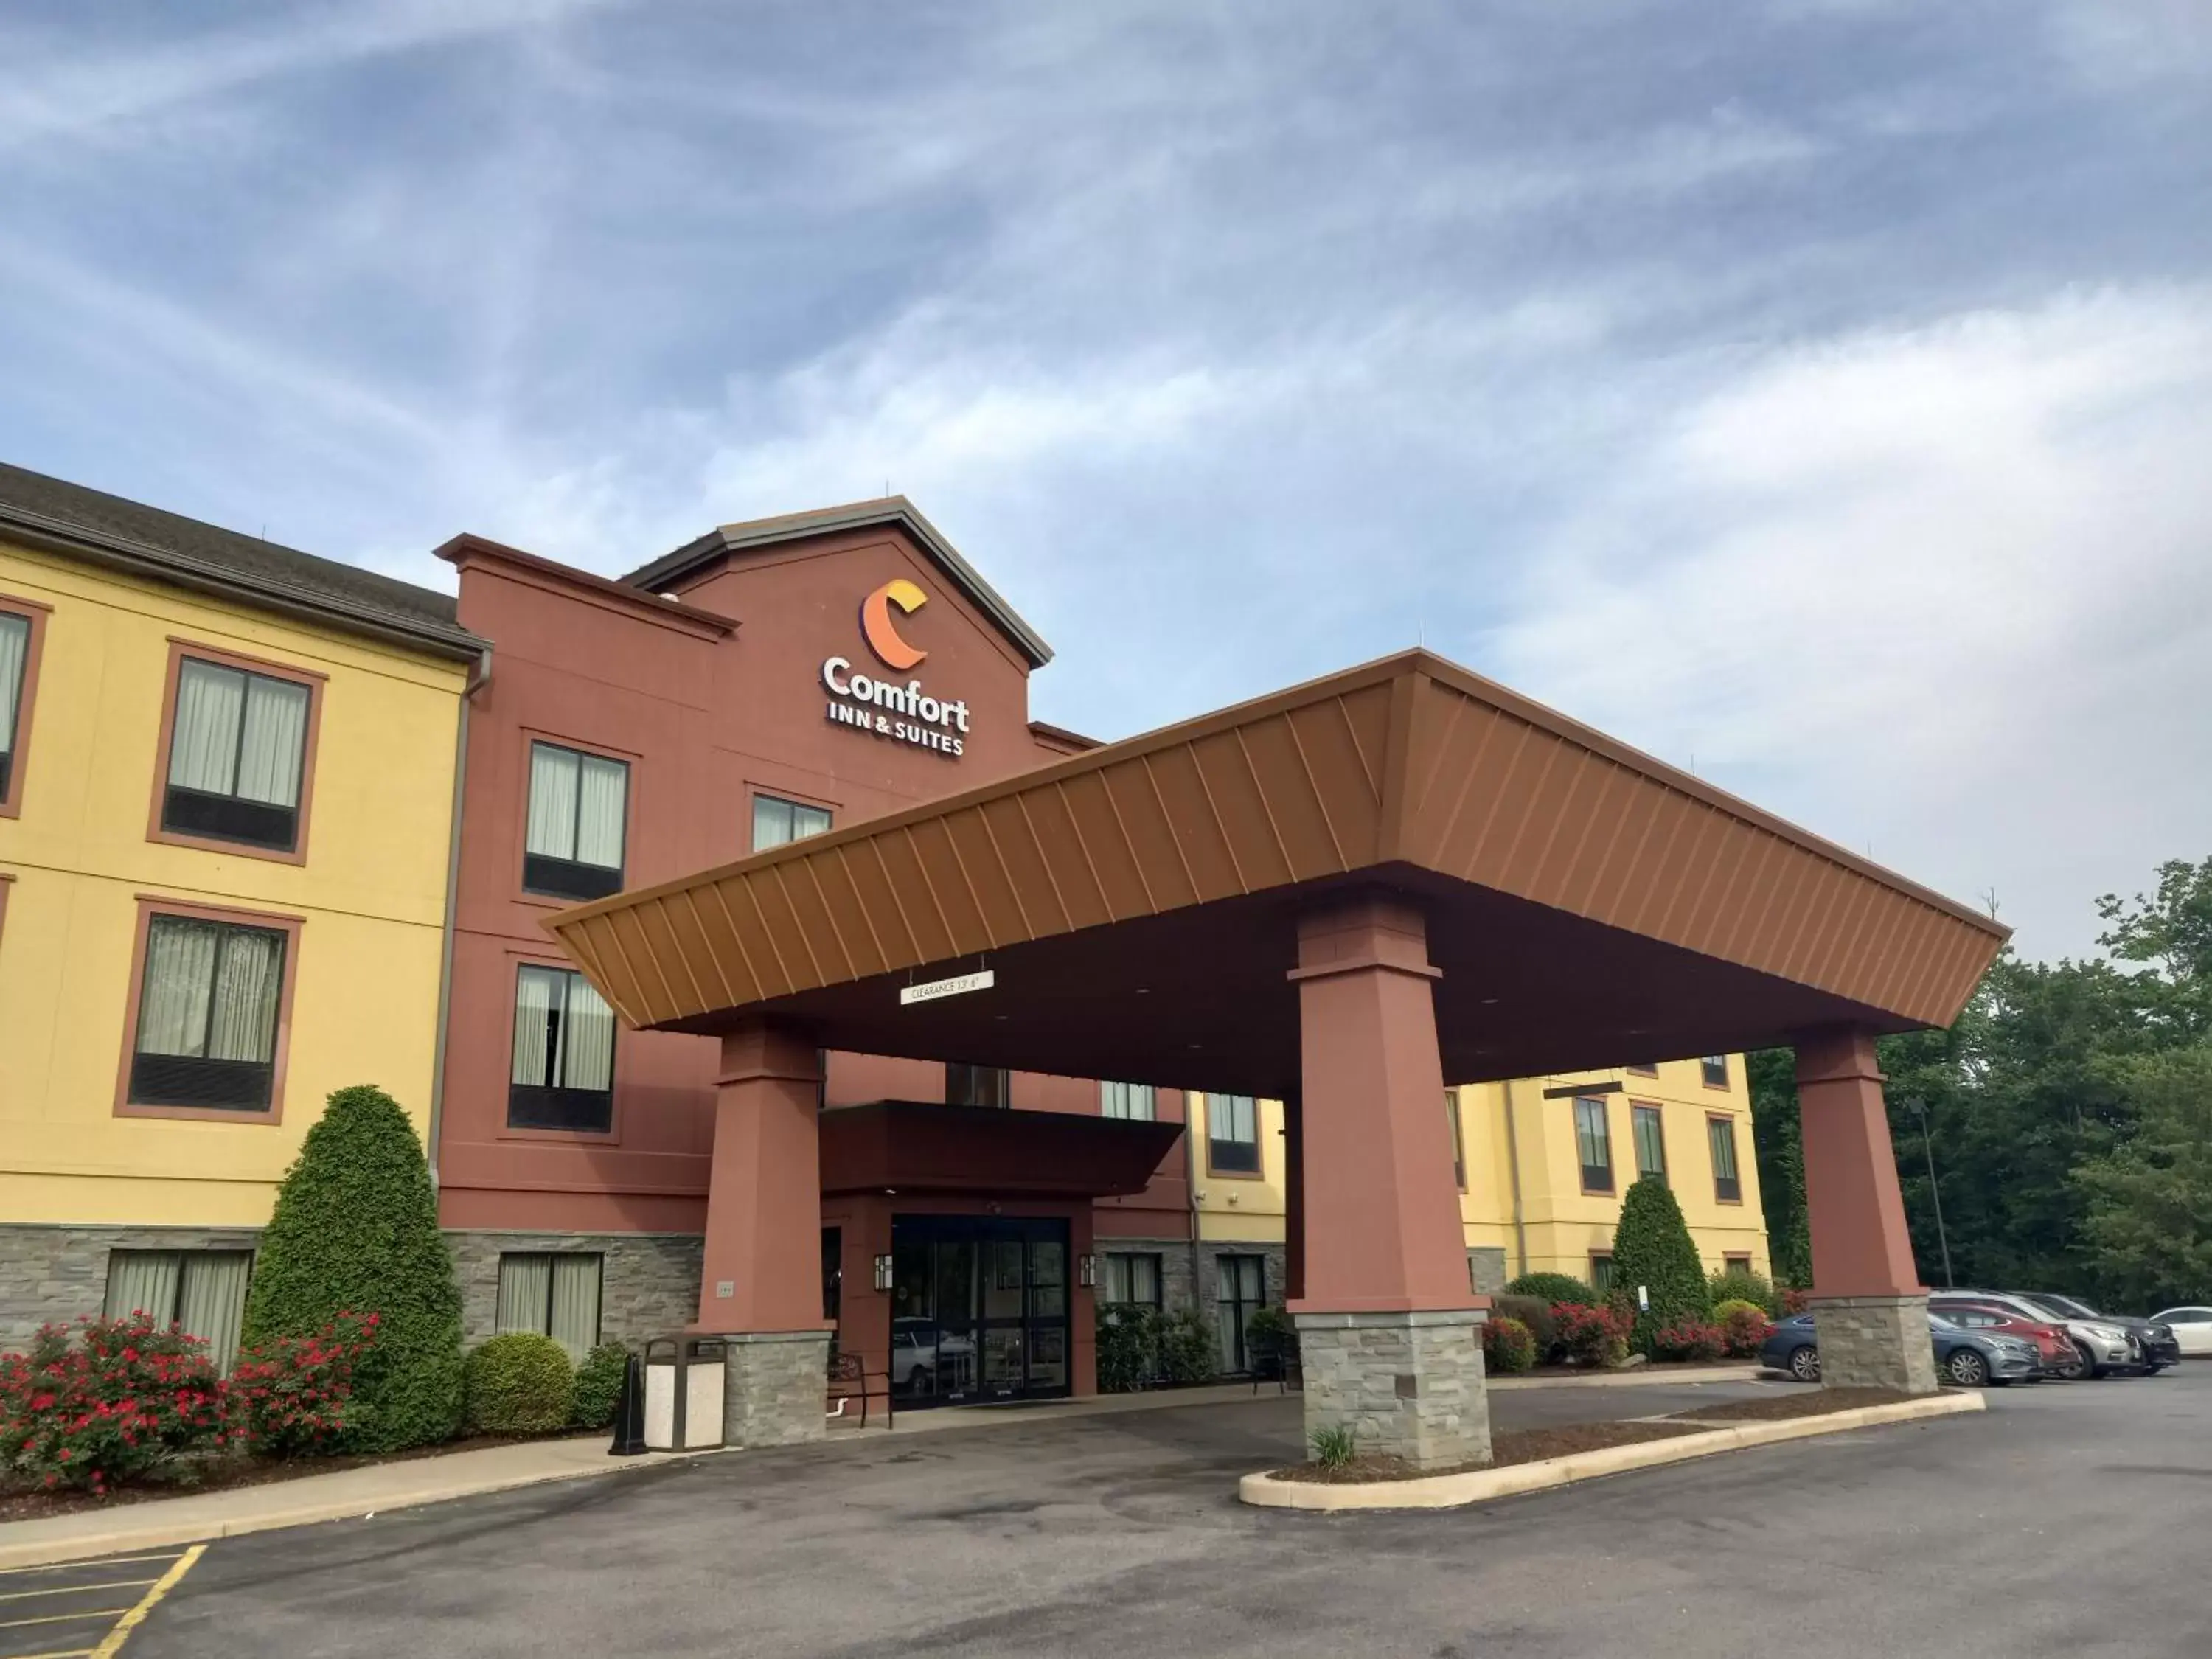 Property Building in Comfort Inn & Suites Tunkhannock